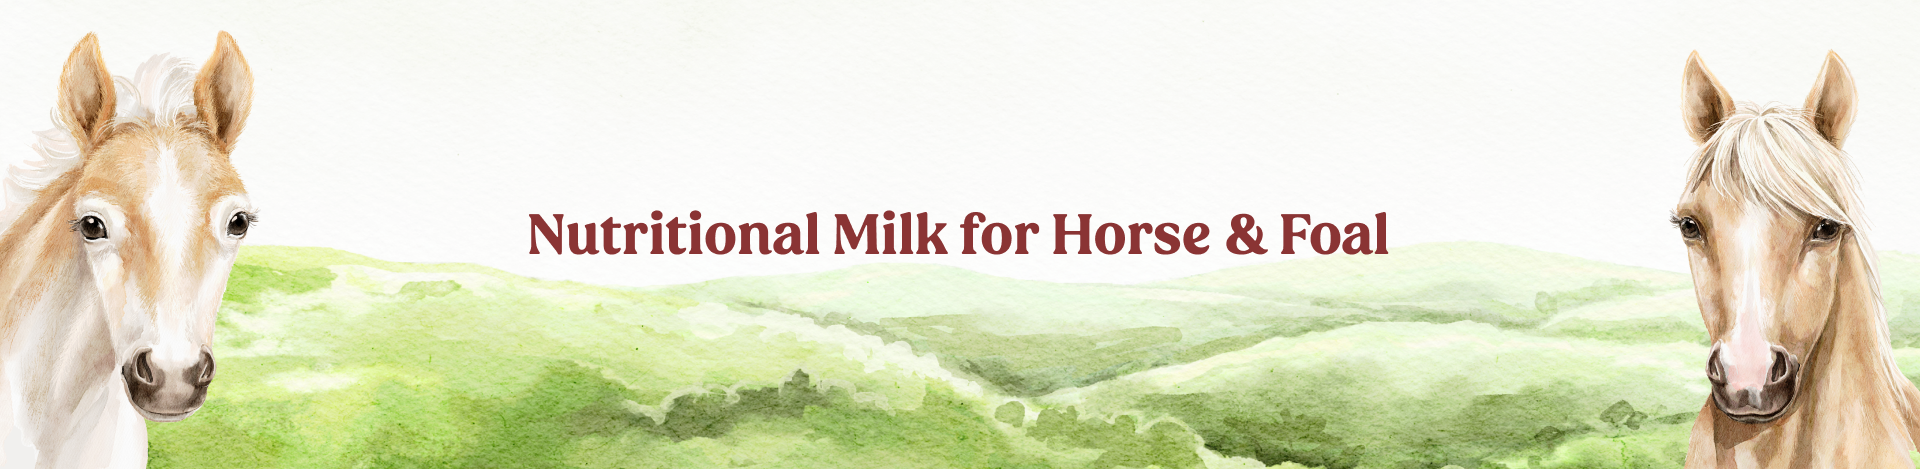 Nutritional Milk for Horse & Foal Banner